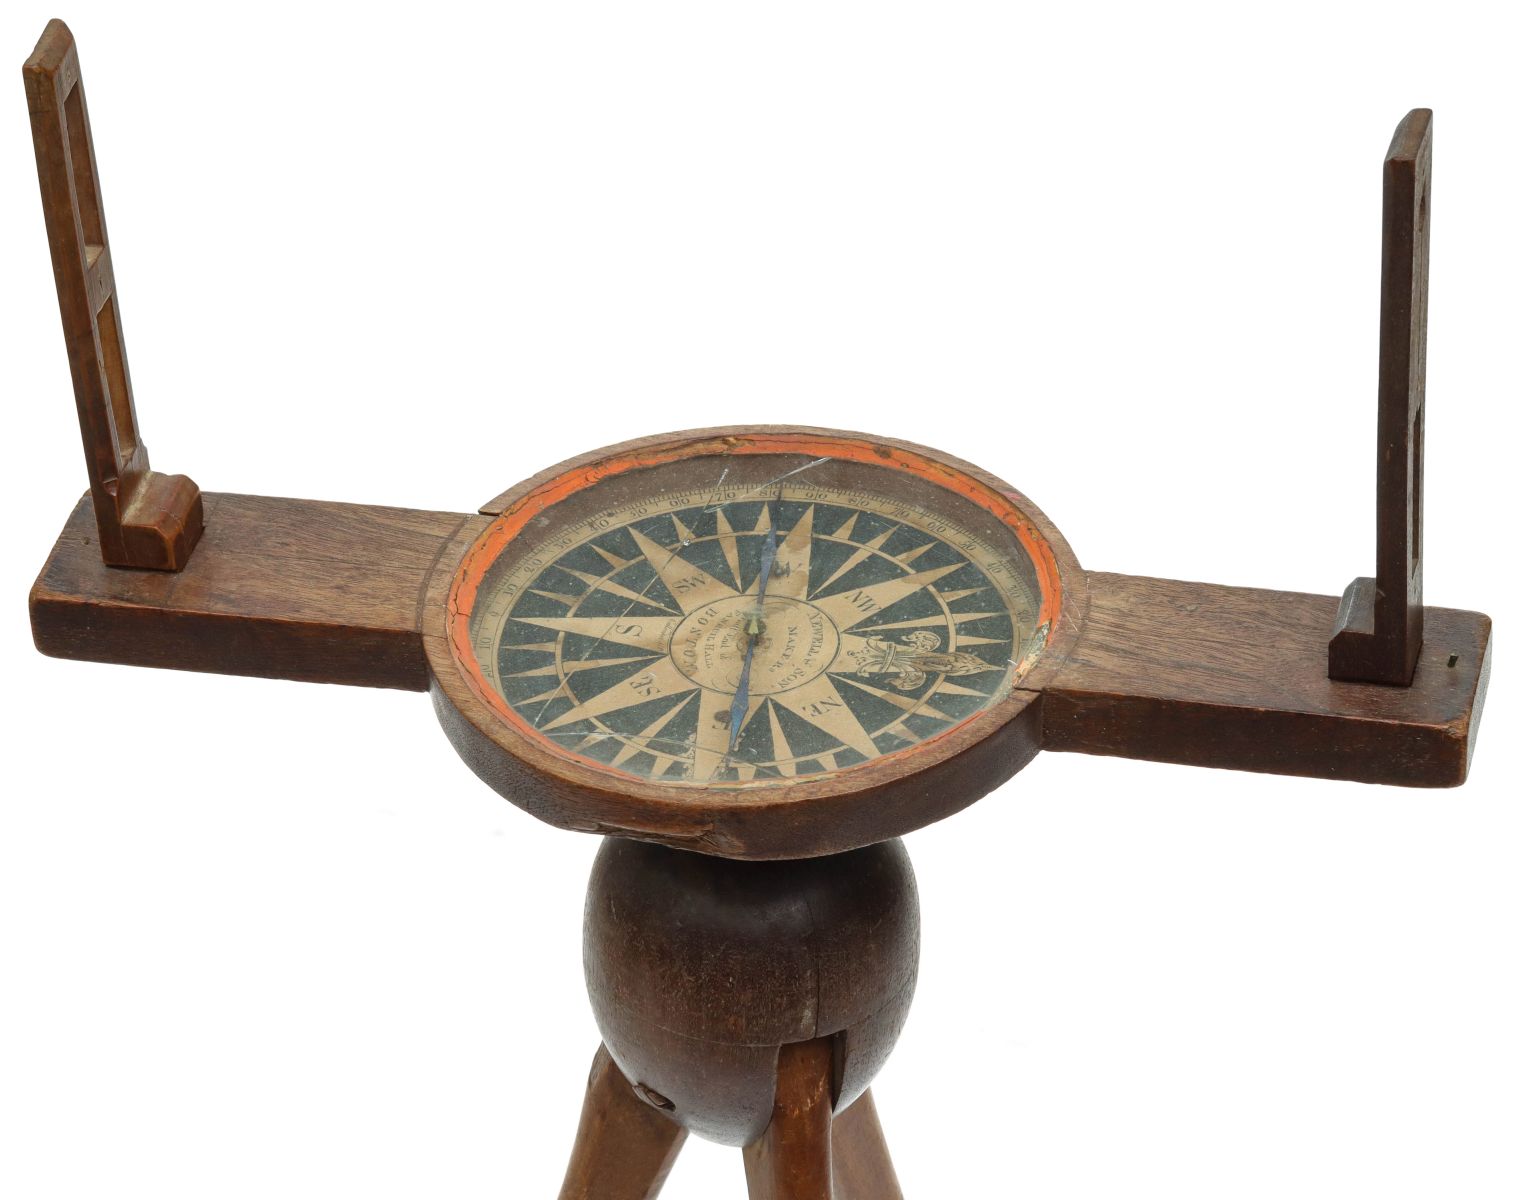 AN 18TH C. WALNUT SURVEYING COMPASS SIGNED NEWELL & SON